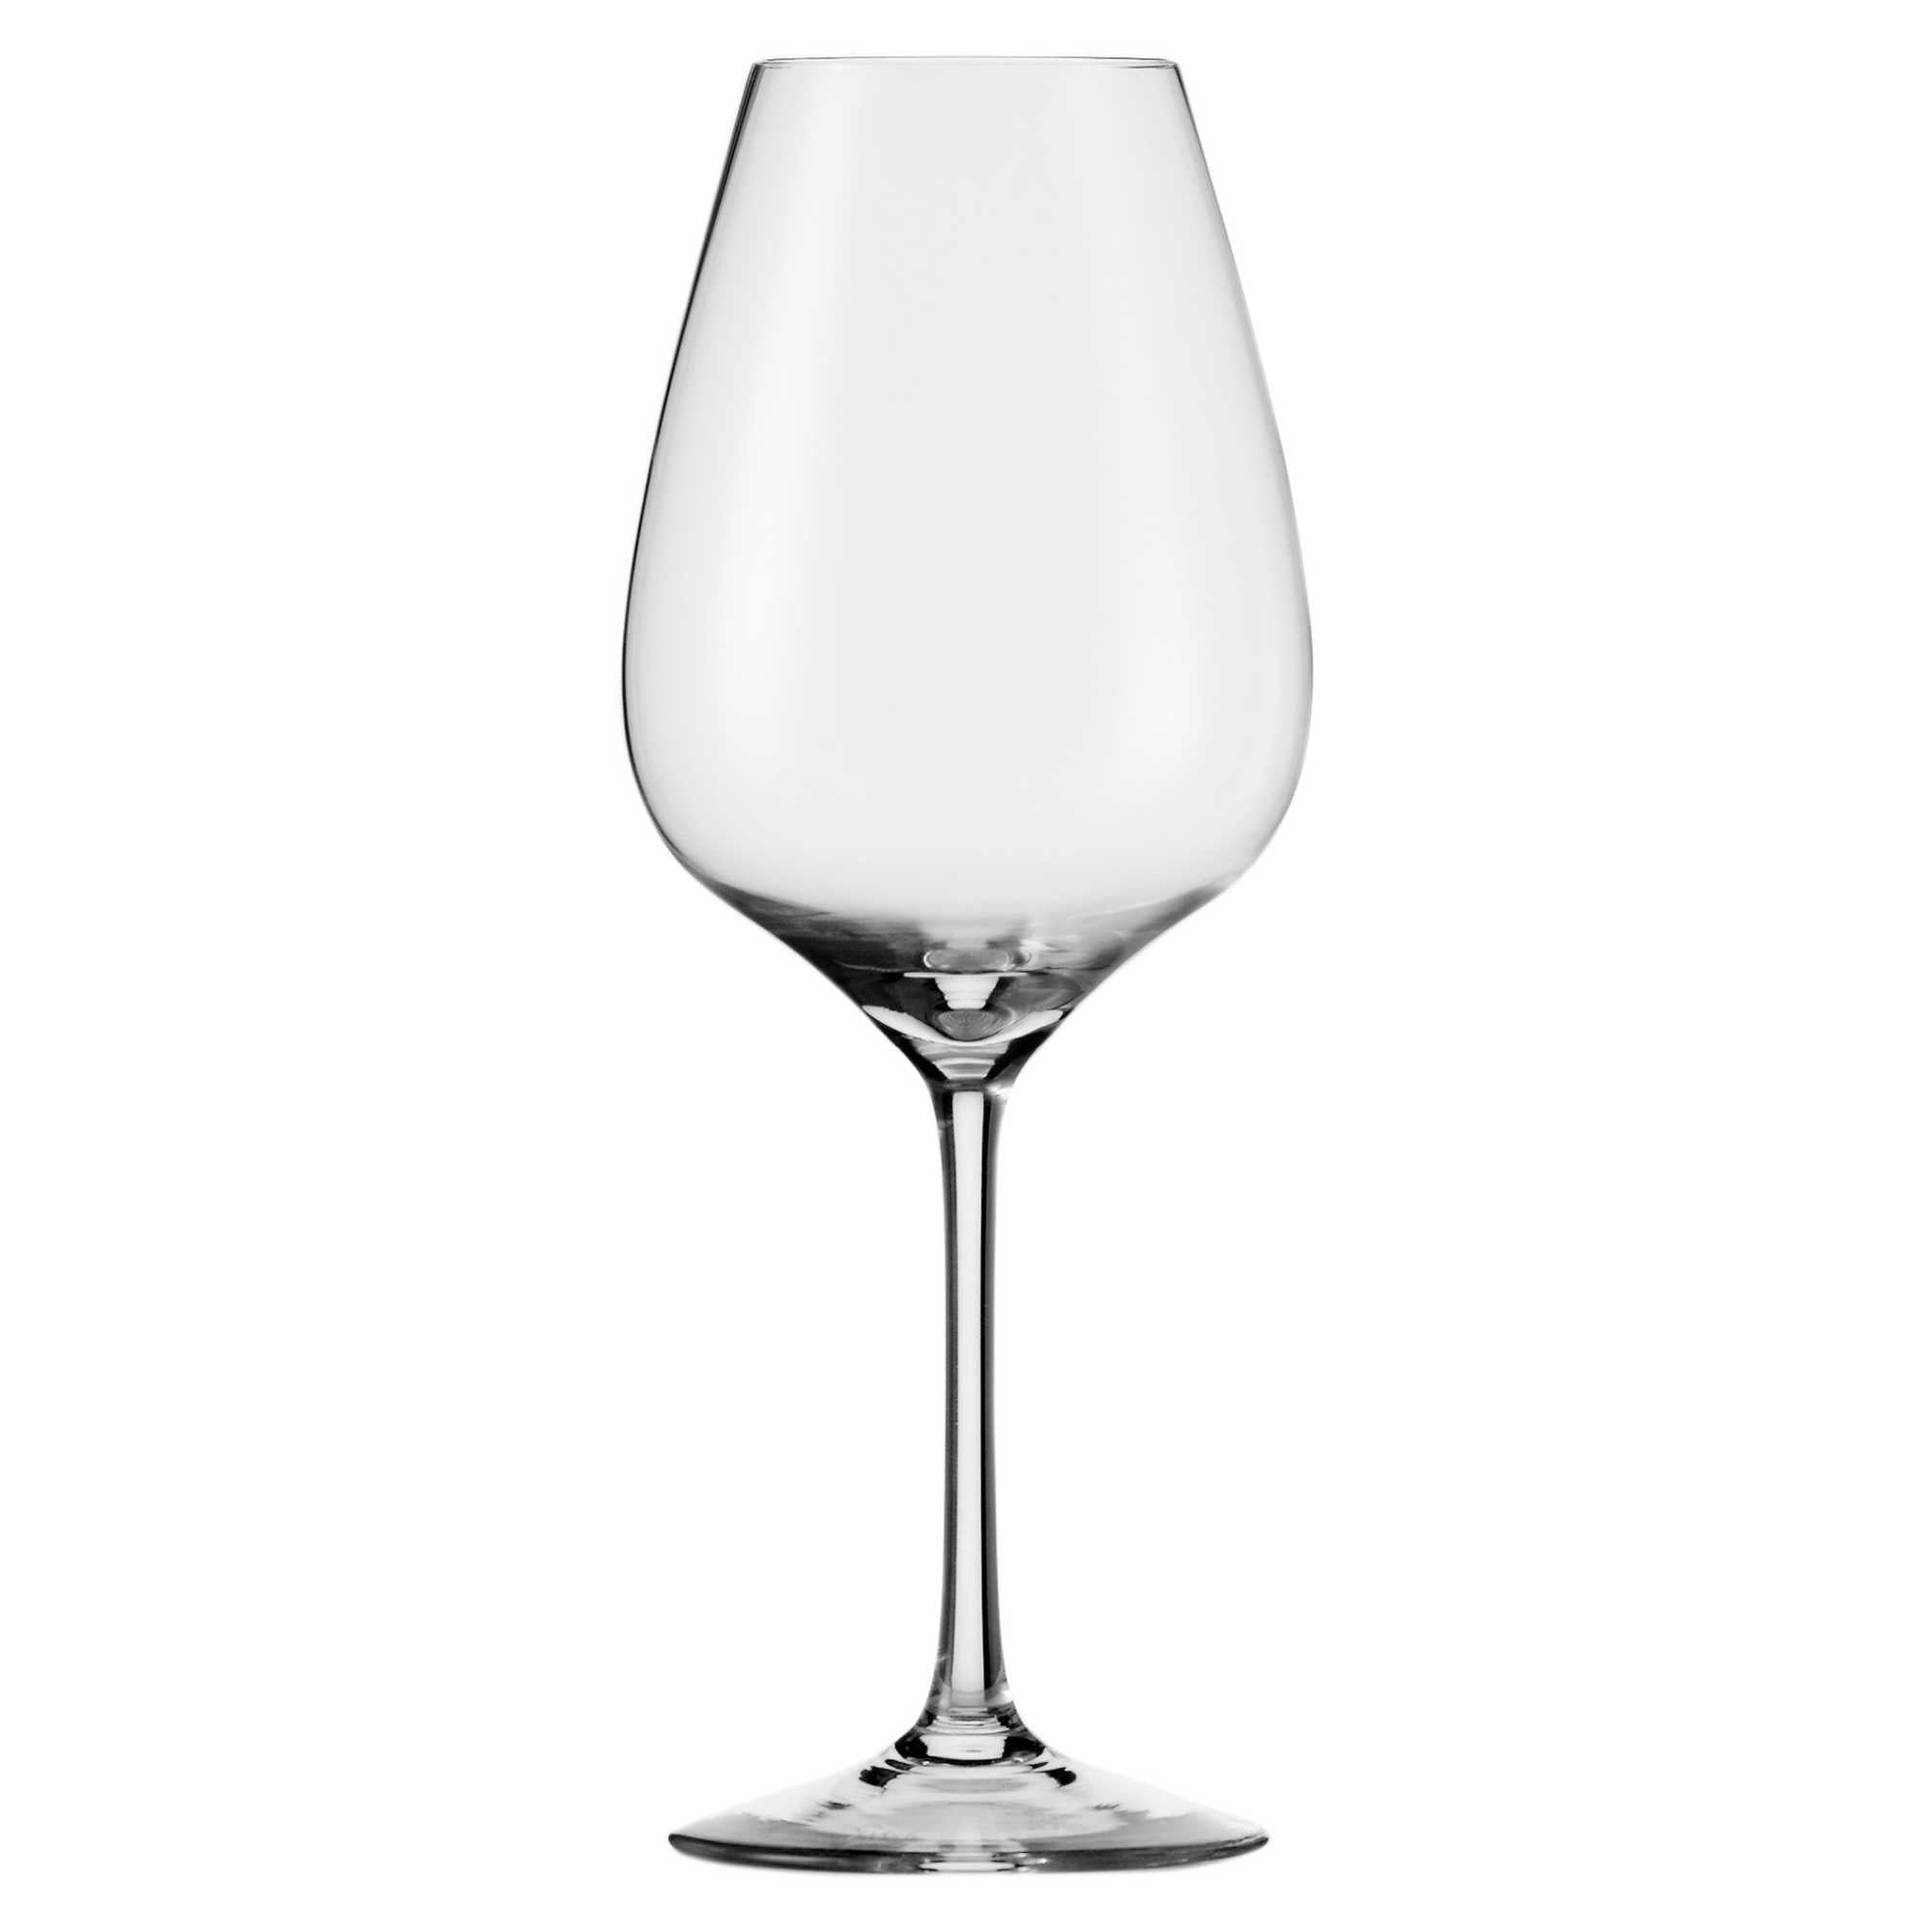 EISCH Germany fruity & romantic All-Purpose Wine Glasses, Gift Set of 2,  1 set - Interismo